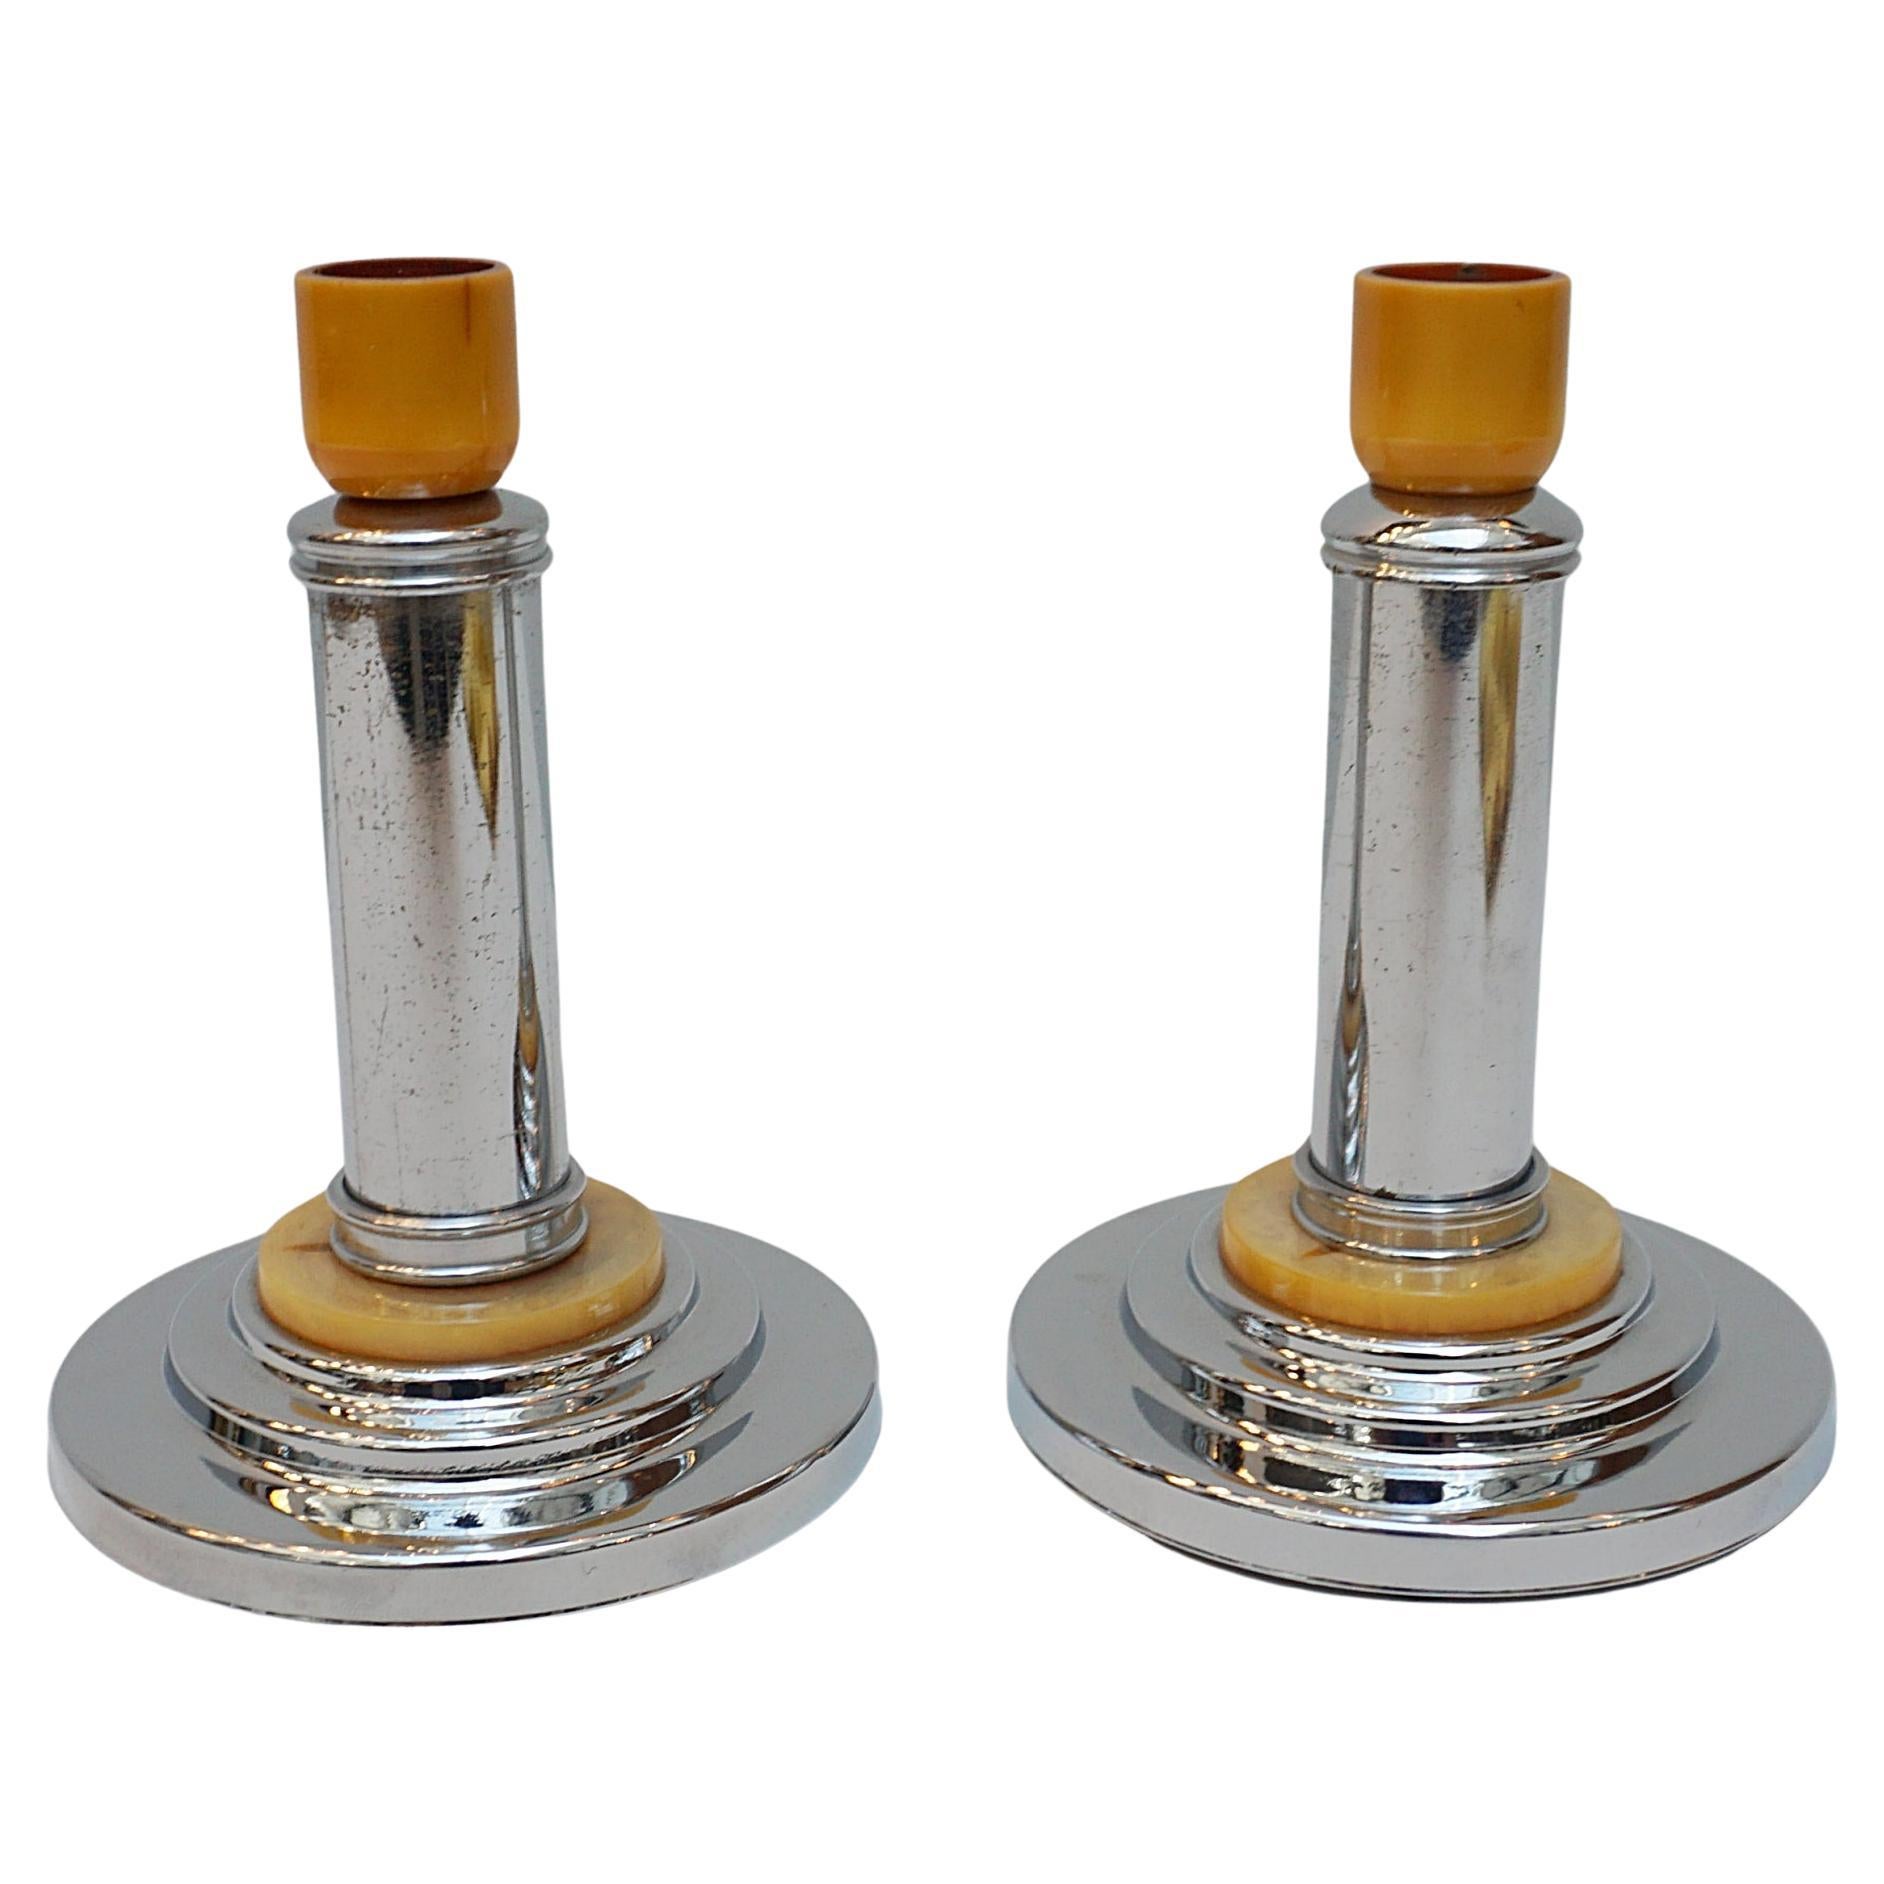 A Pair of Art Deco Style Bakelite Candlesticks For Sale